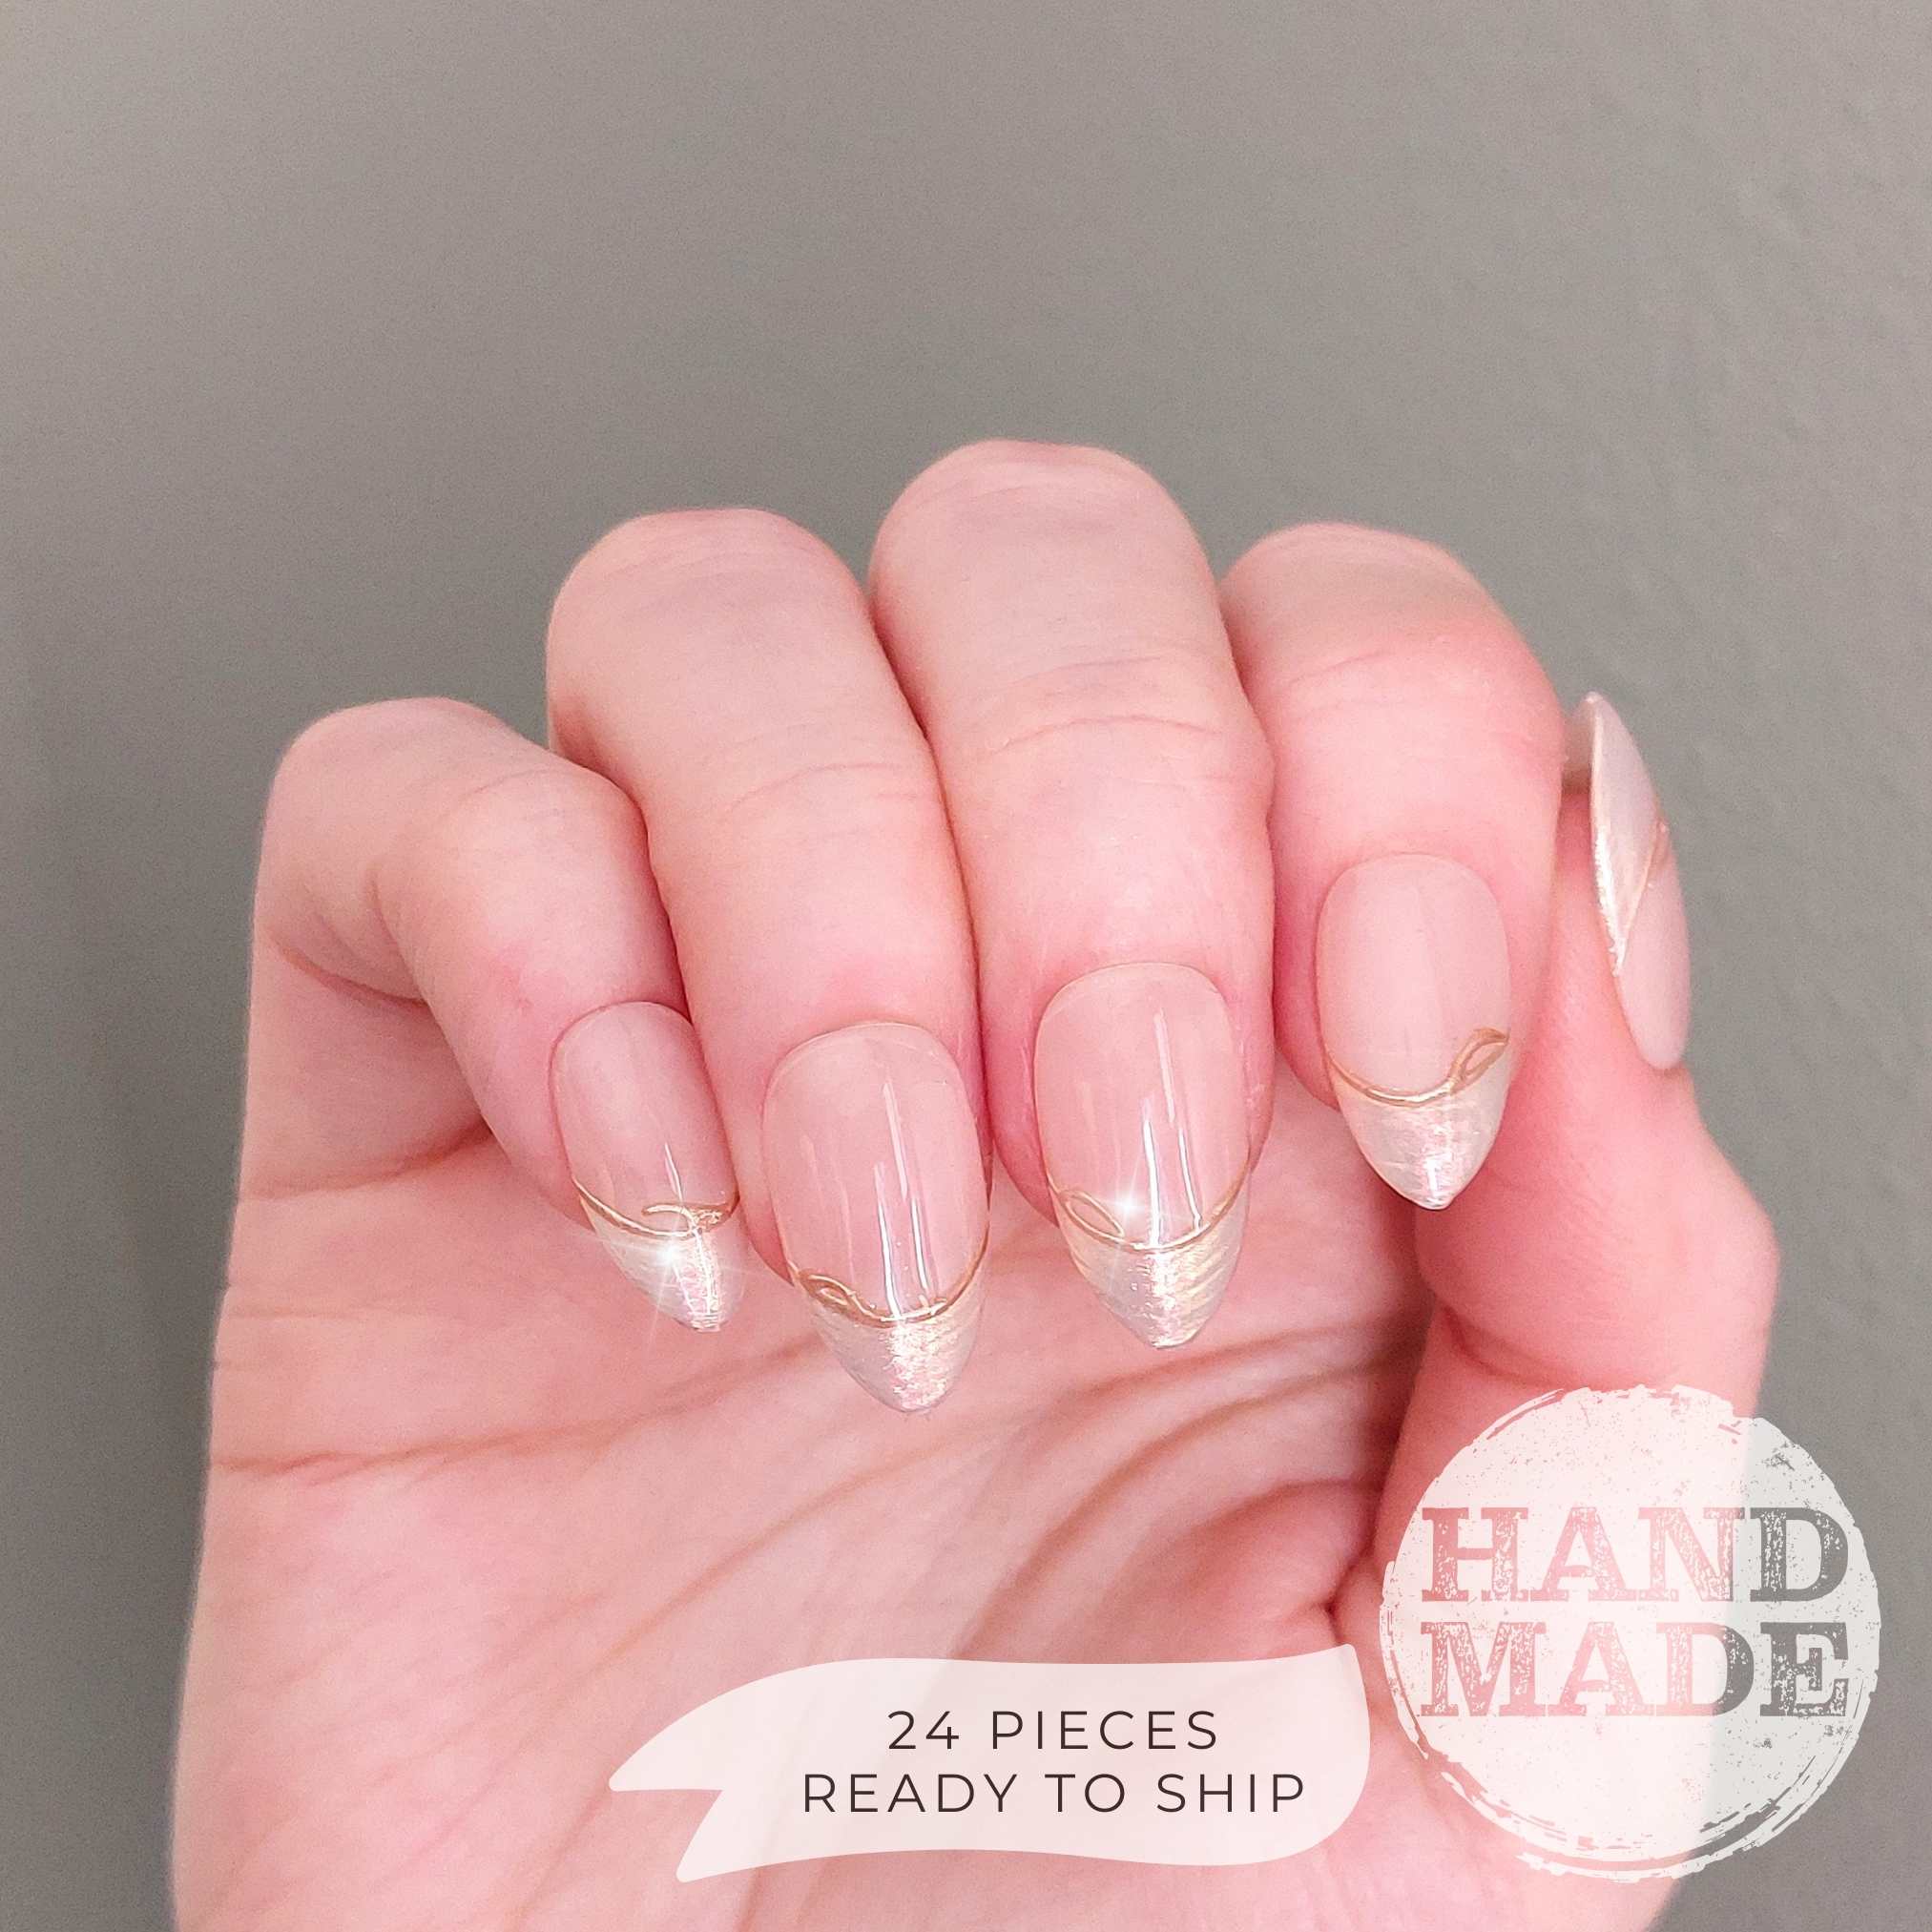 Pearlescent French Tip Press on Nails with Gold Line on Nude base color, short almond. Handmade press on nails from FancyB Nails.